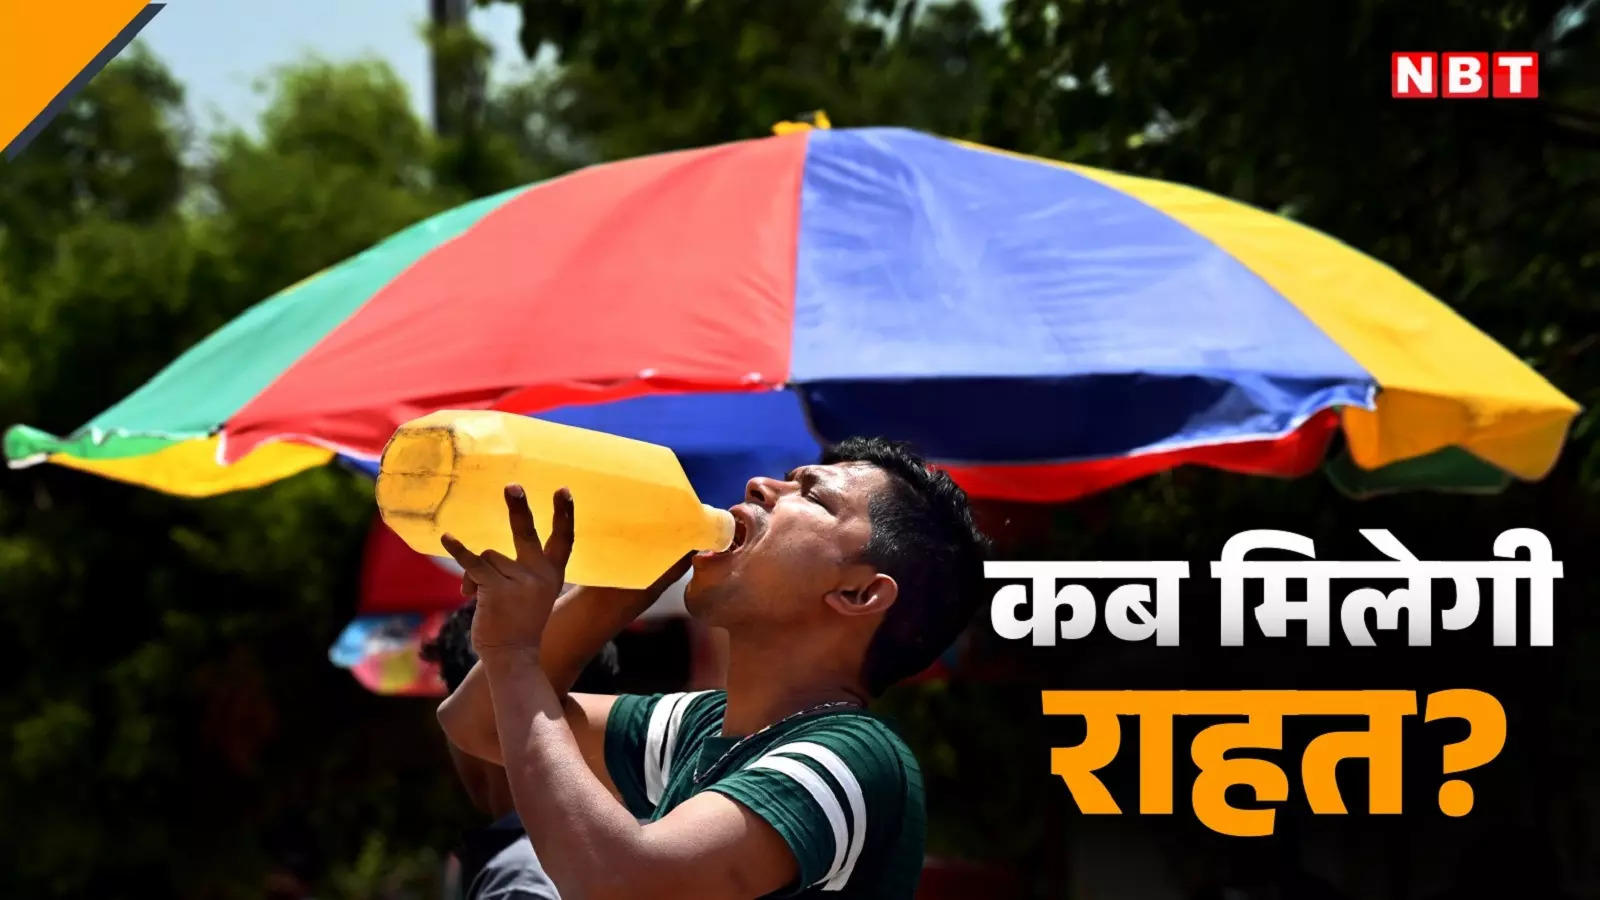 Red alert of heat wave in Delhi… scorching from UP to Rajasthan, when will monsoon bring relief?